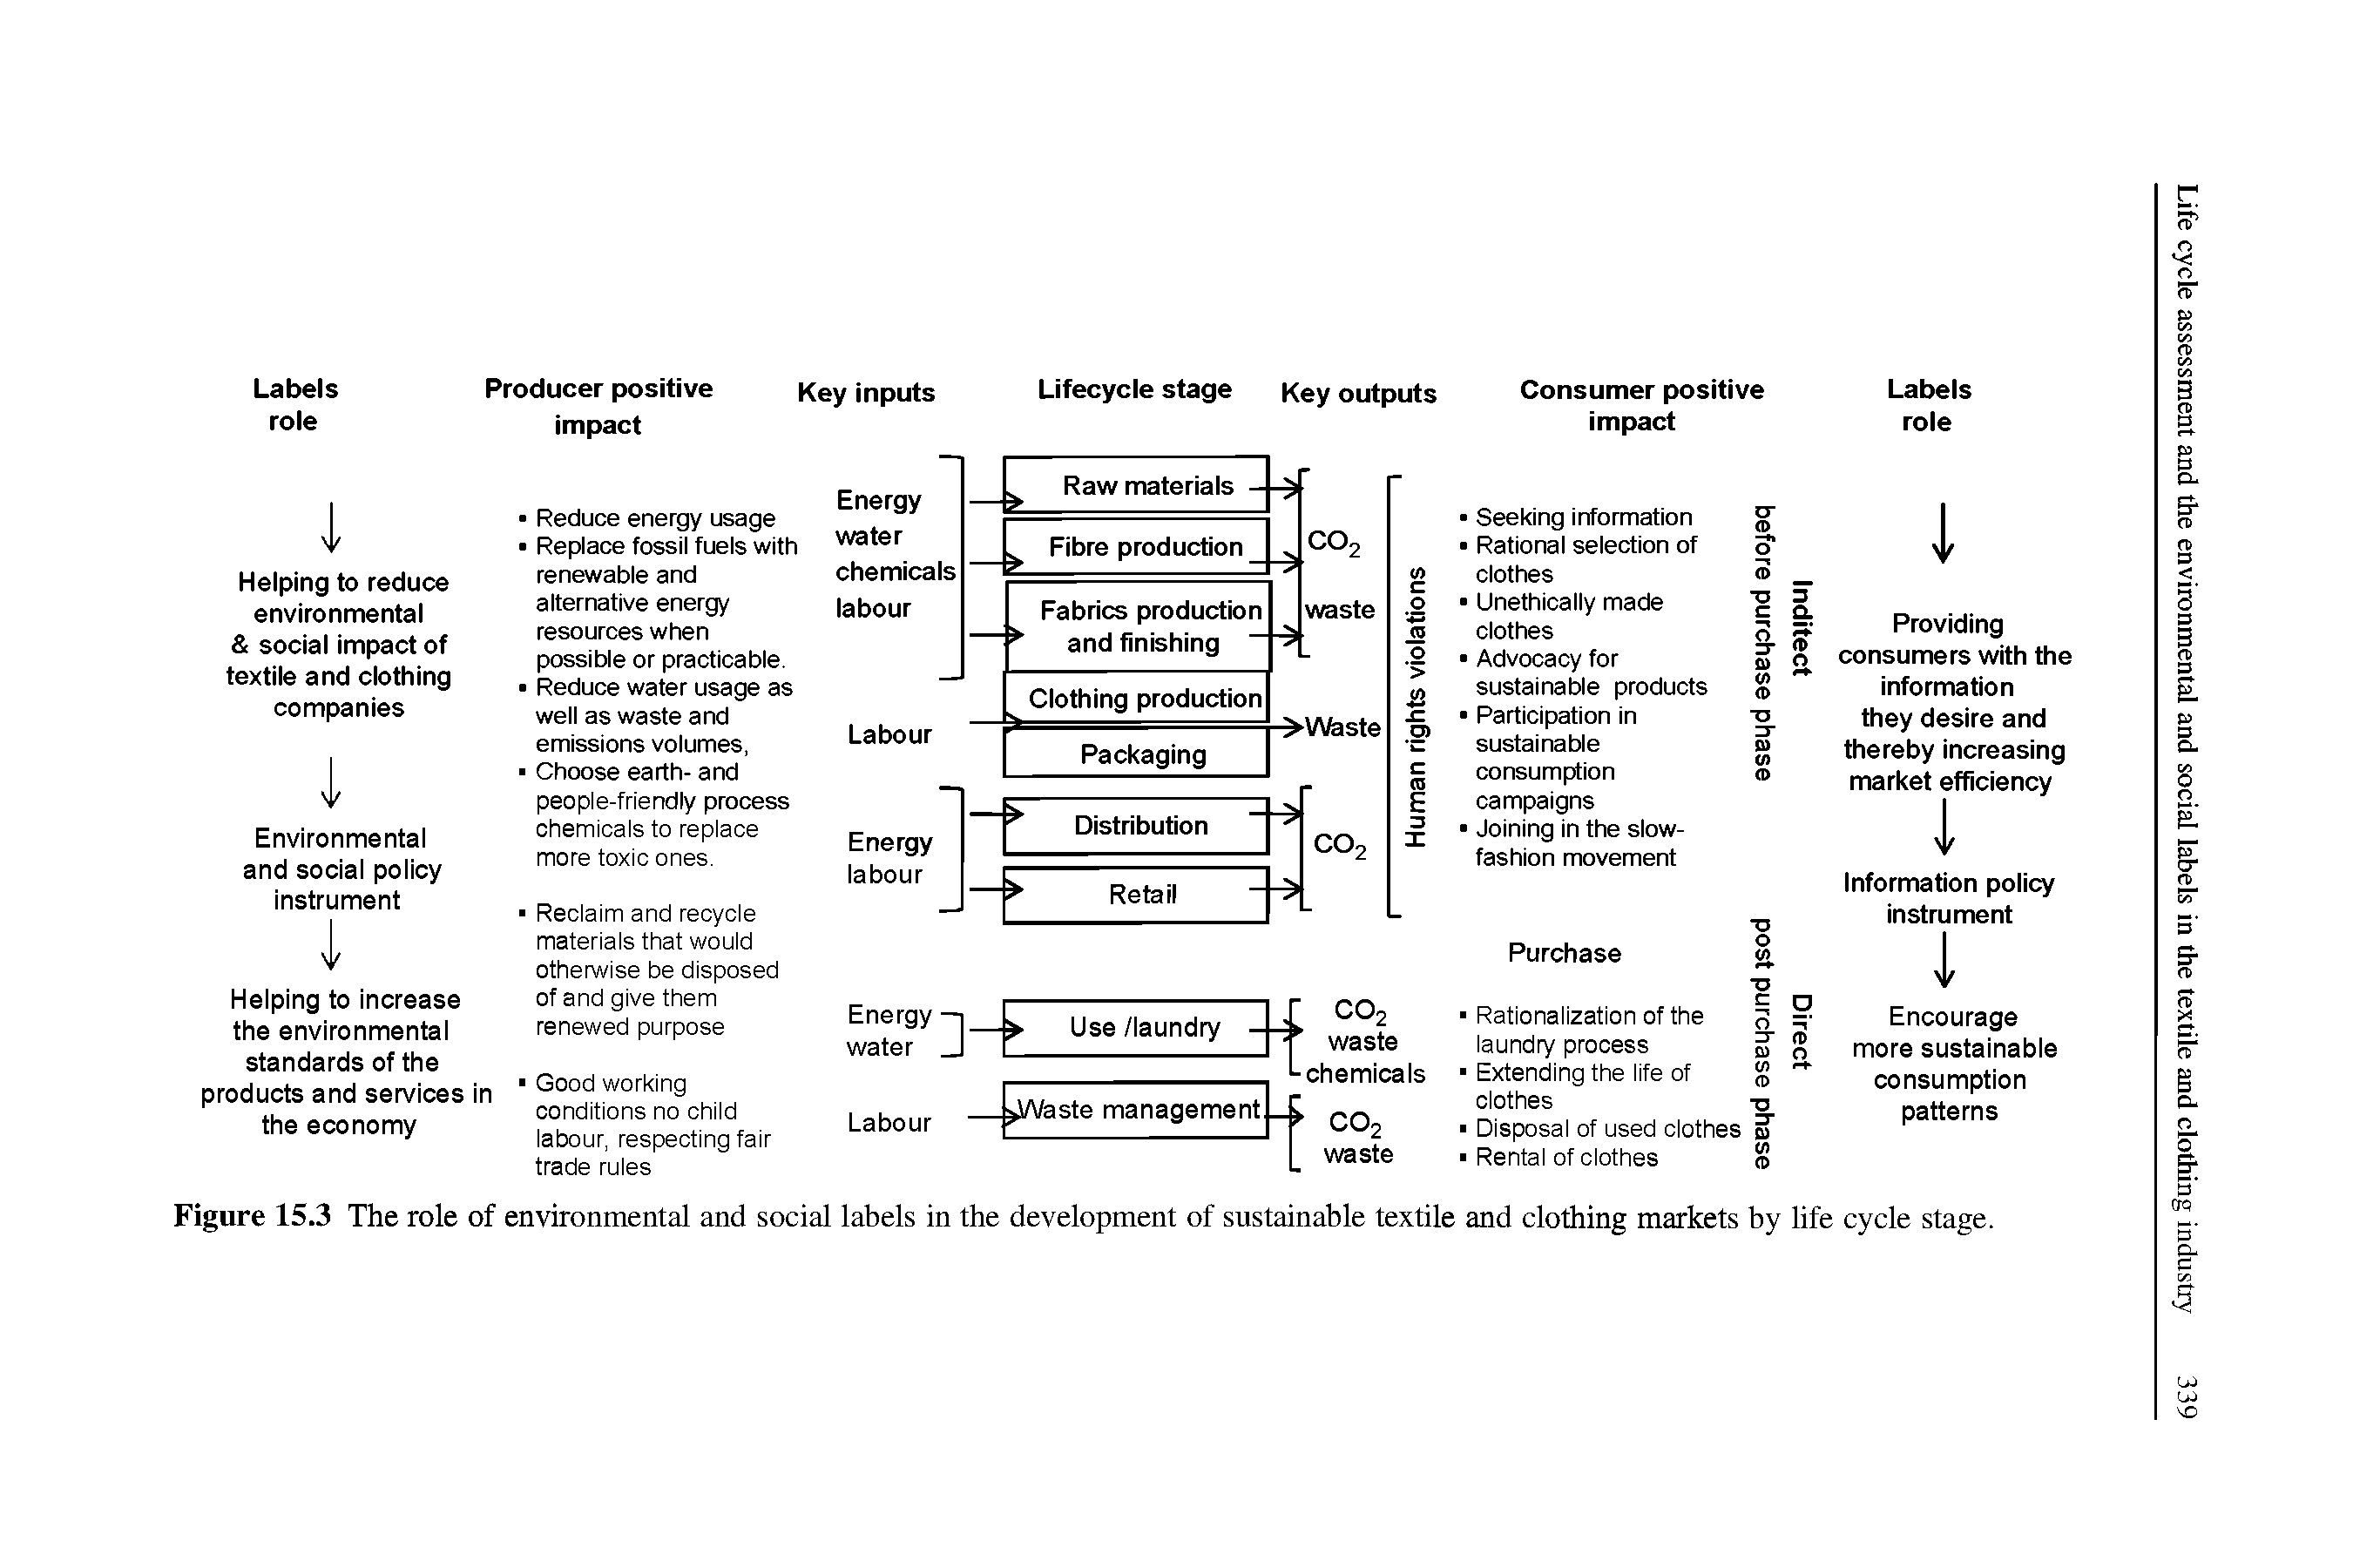 Figure 15.3 The role of environmental and social labels in the development of sustainable textile and clothing markets by life cycle stage.